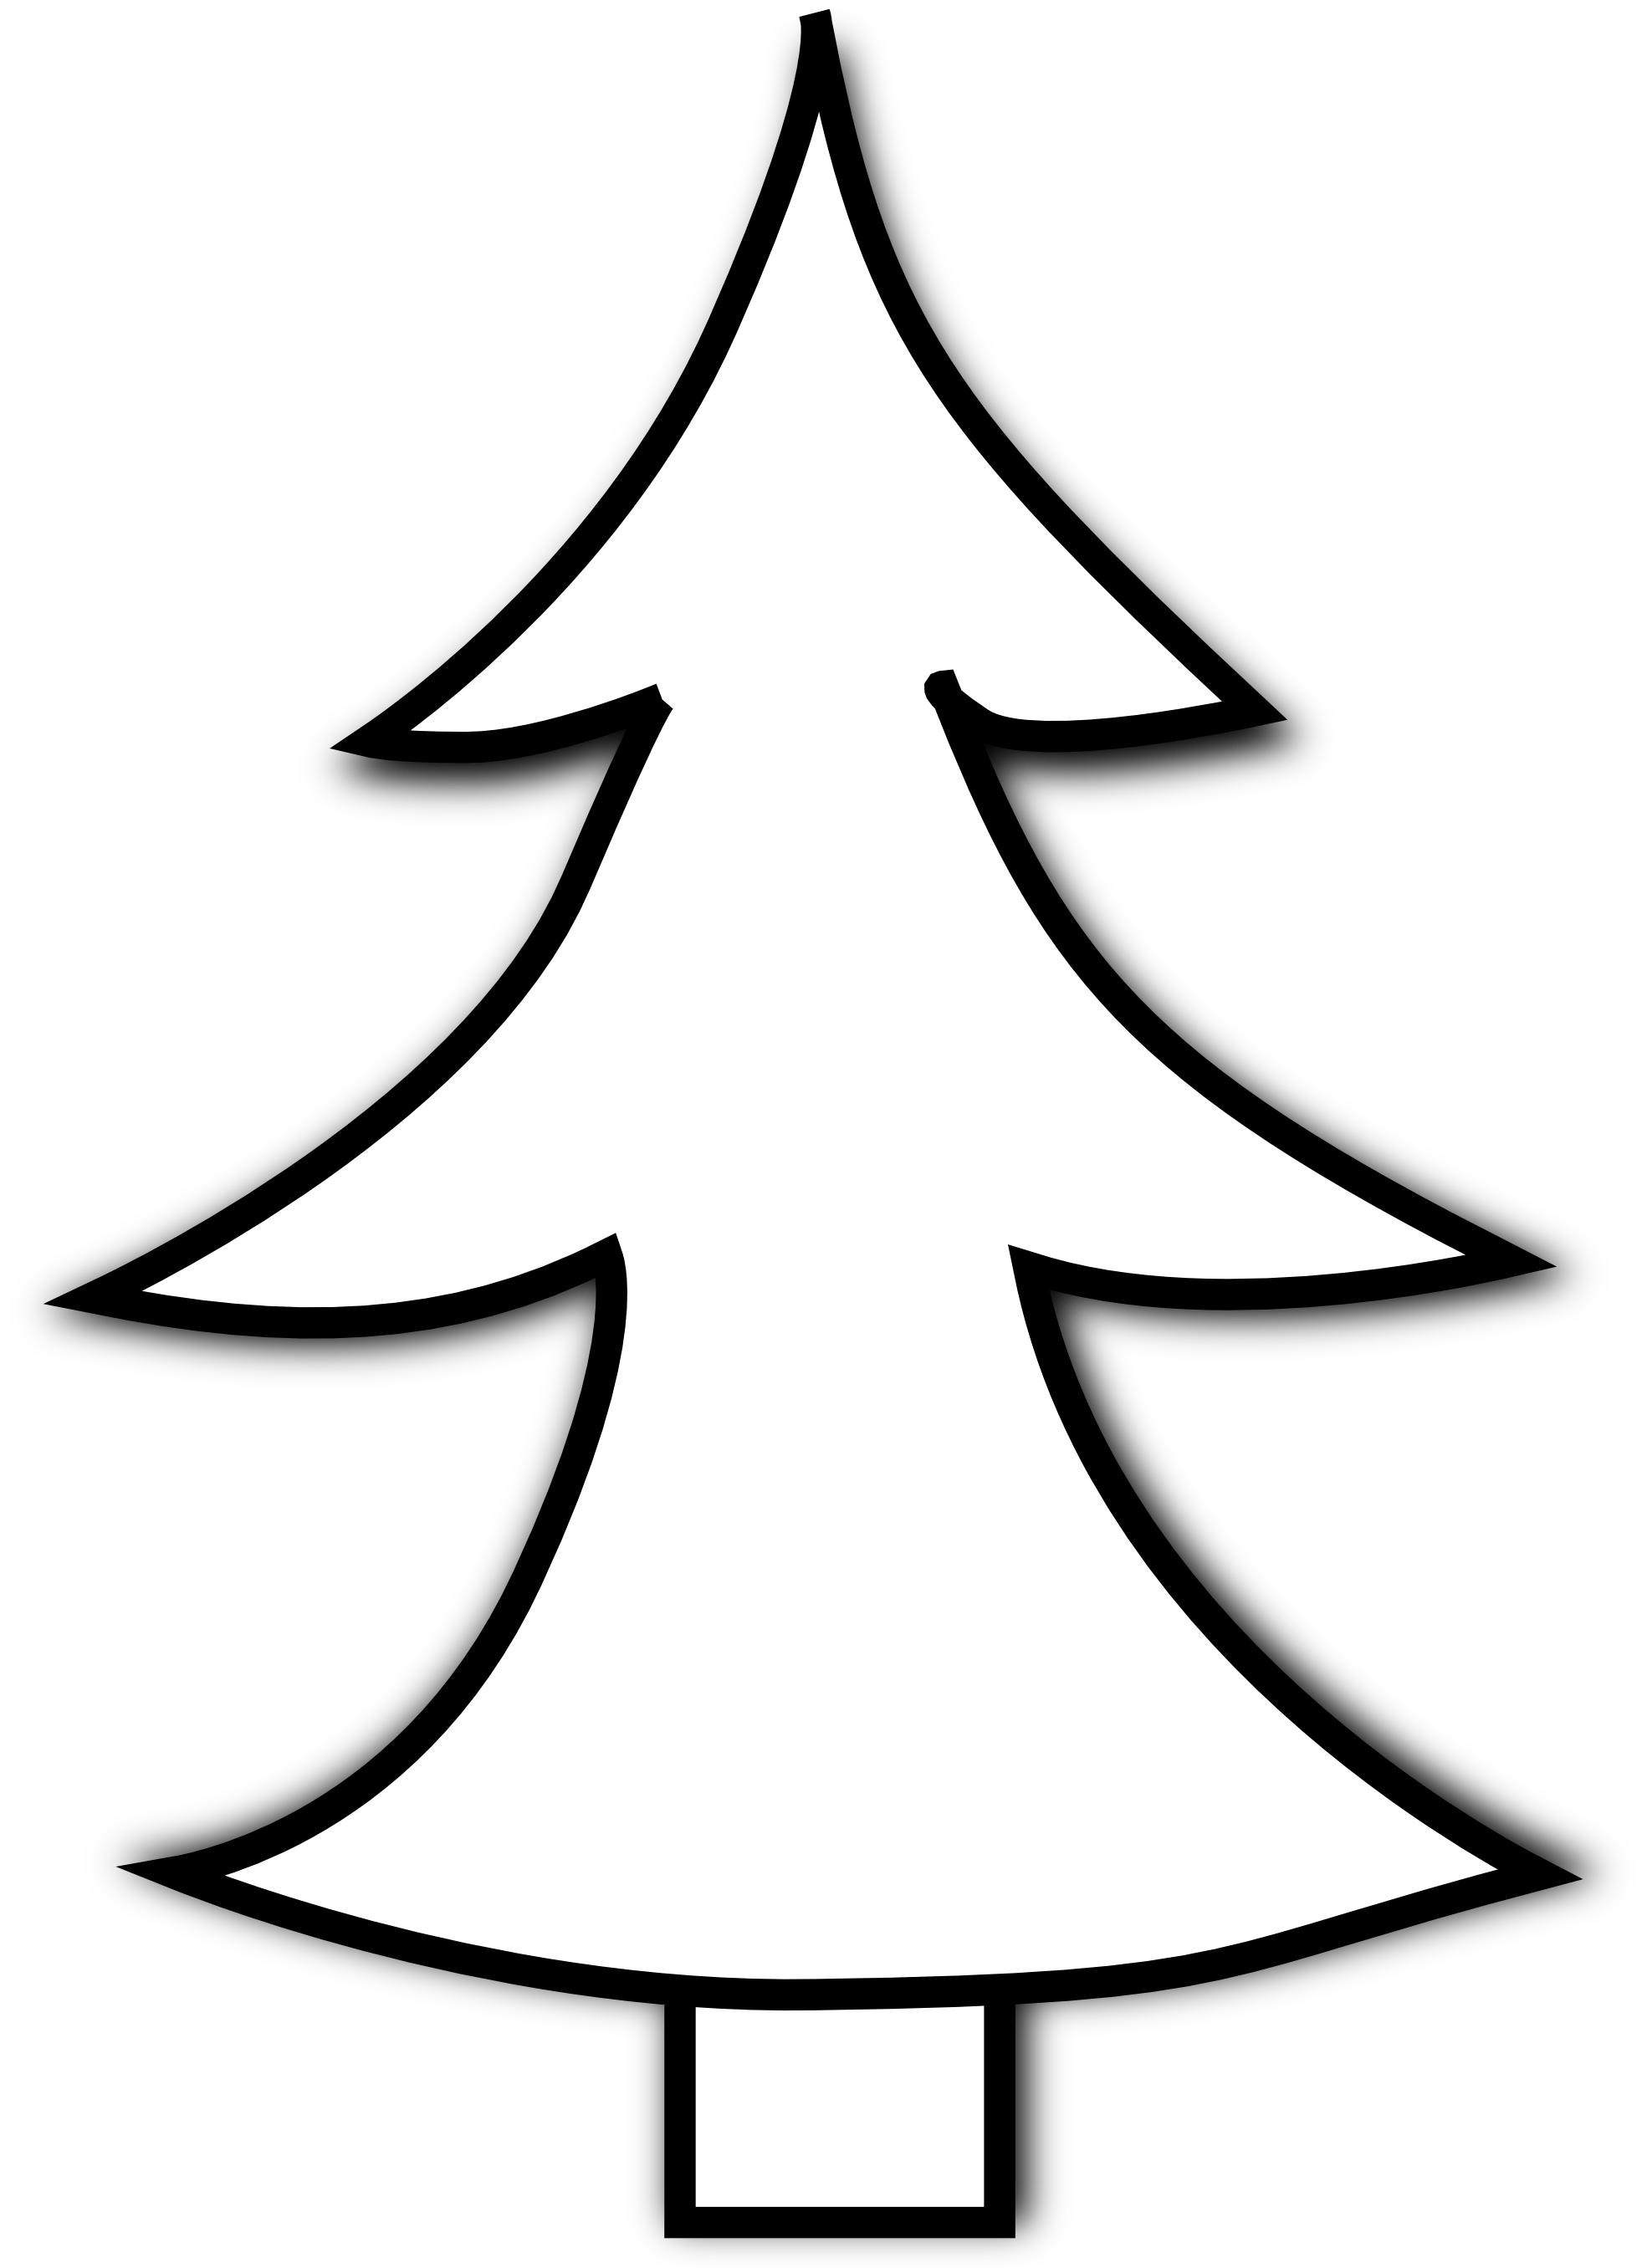 clipart trees black and white free - photo #1